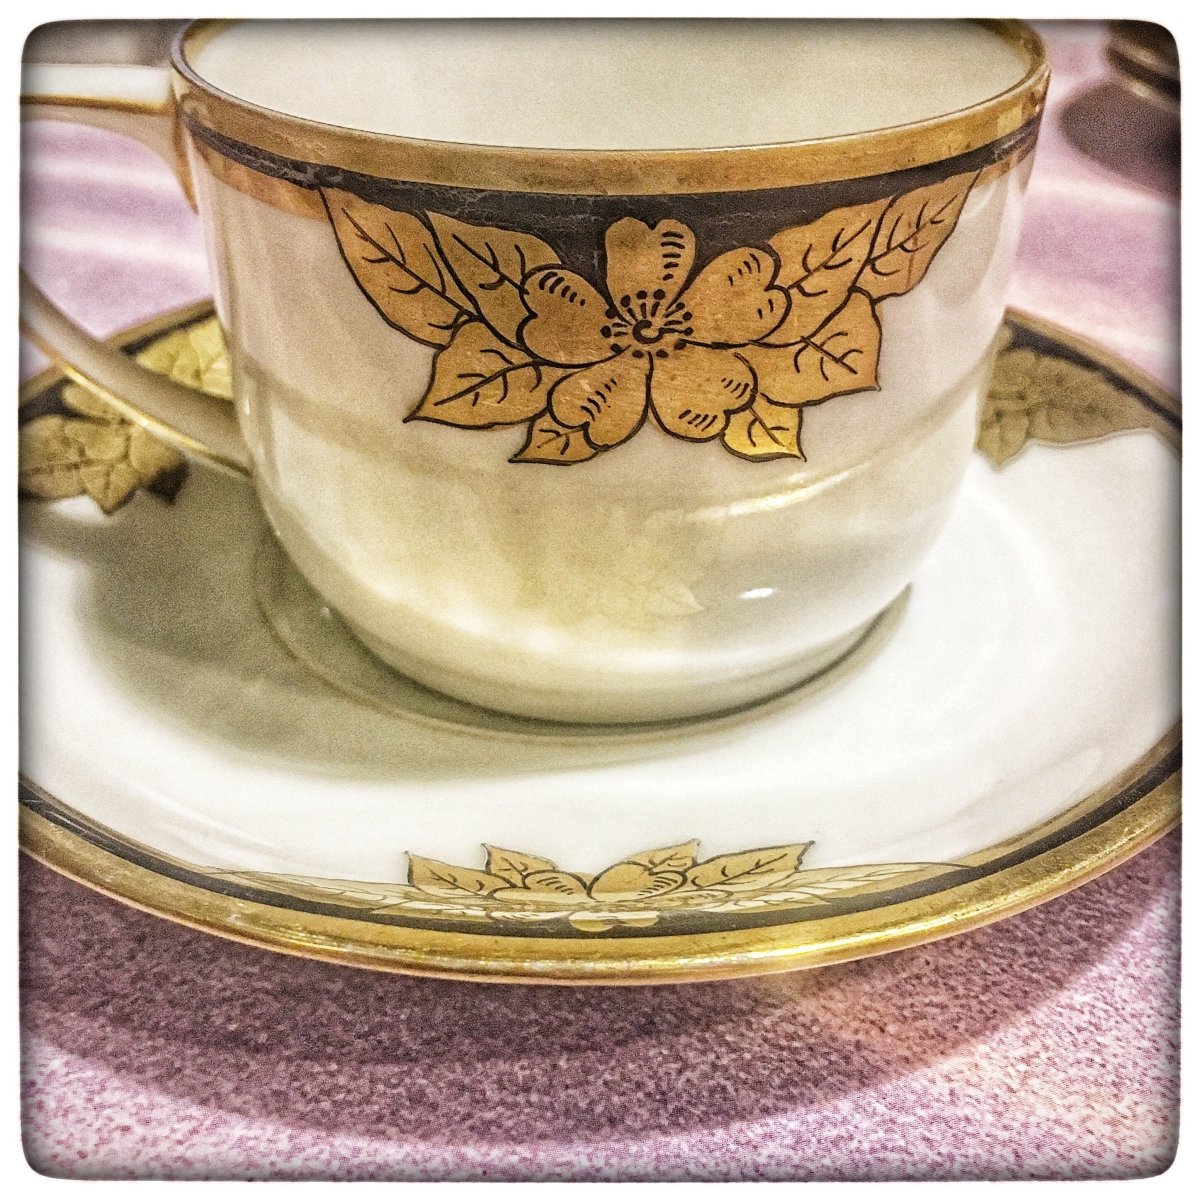 Hutschenreuther | Antique | Rare Hand-Painted & Gilded Mocha Cups c.1920, Bavarian Miniature - Chinamania.shop